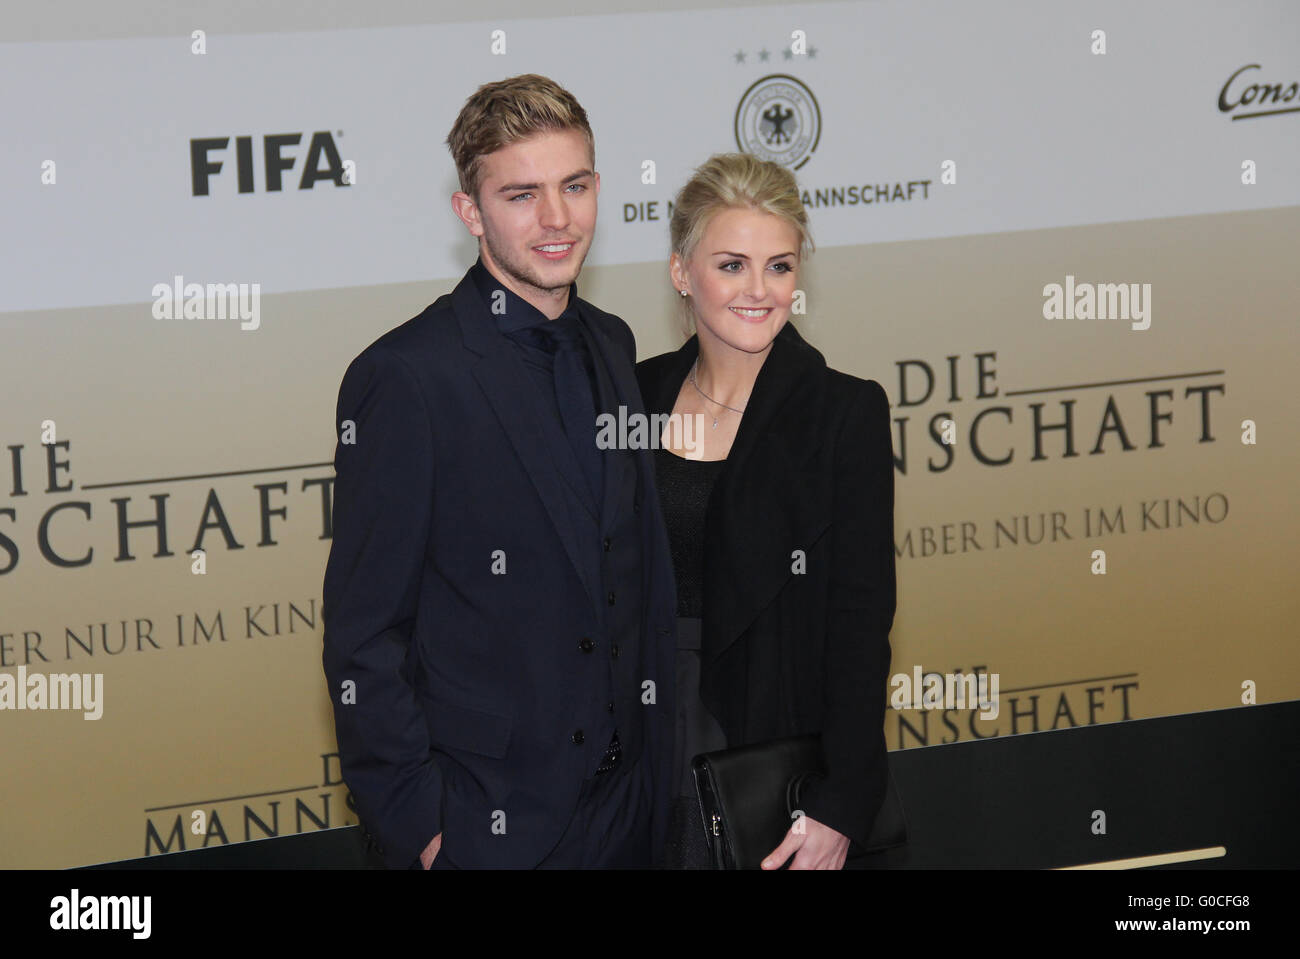 Christoph Kramer Girlfriend High Resolution Stock Photography And Images Alamy